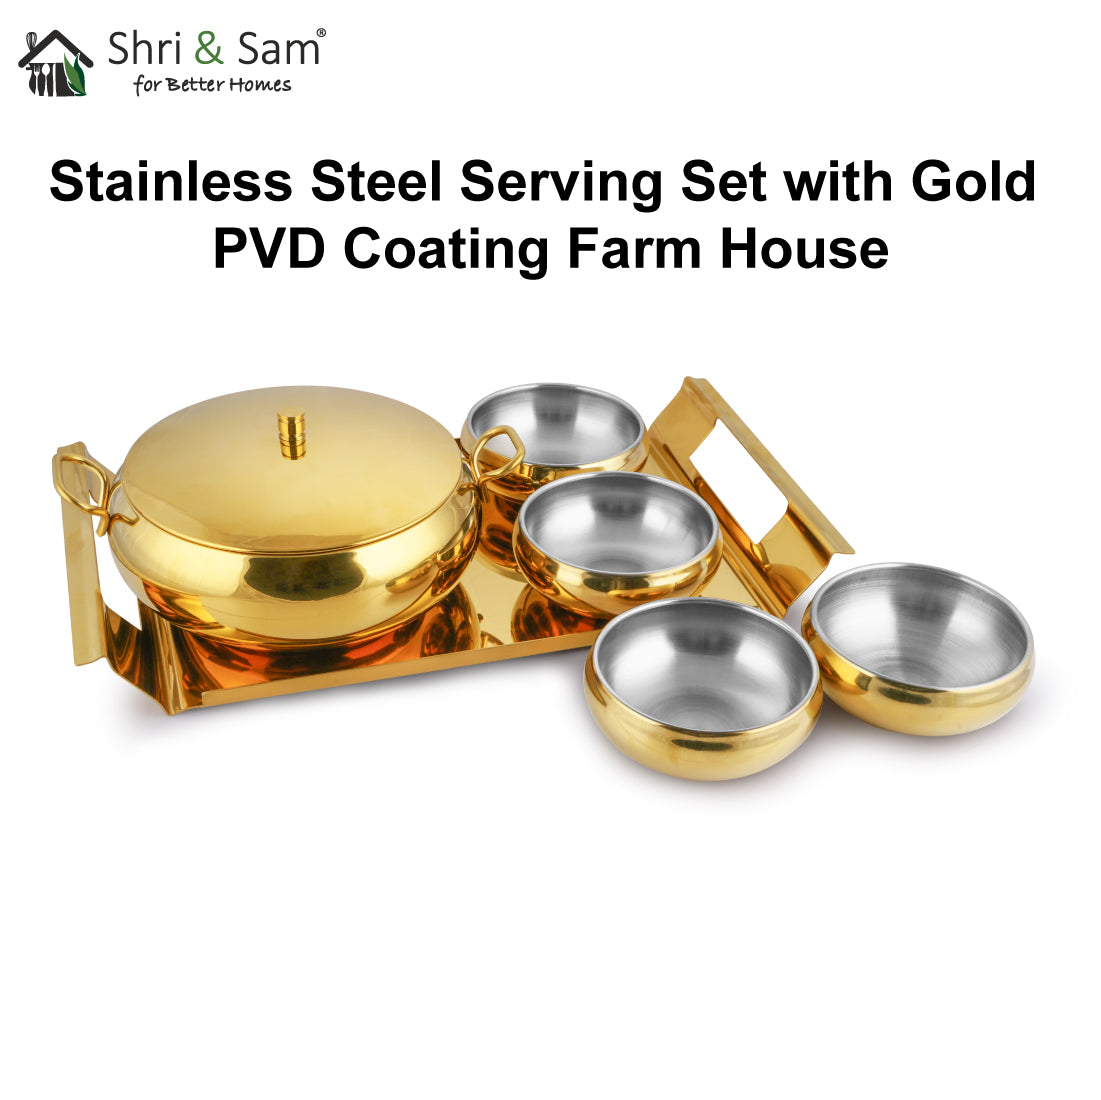 Stainless Steel Serving Set with Gold PVD Coating Farm House